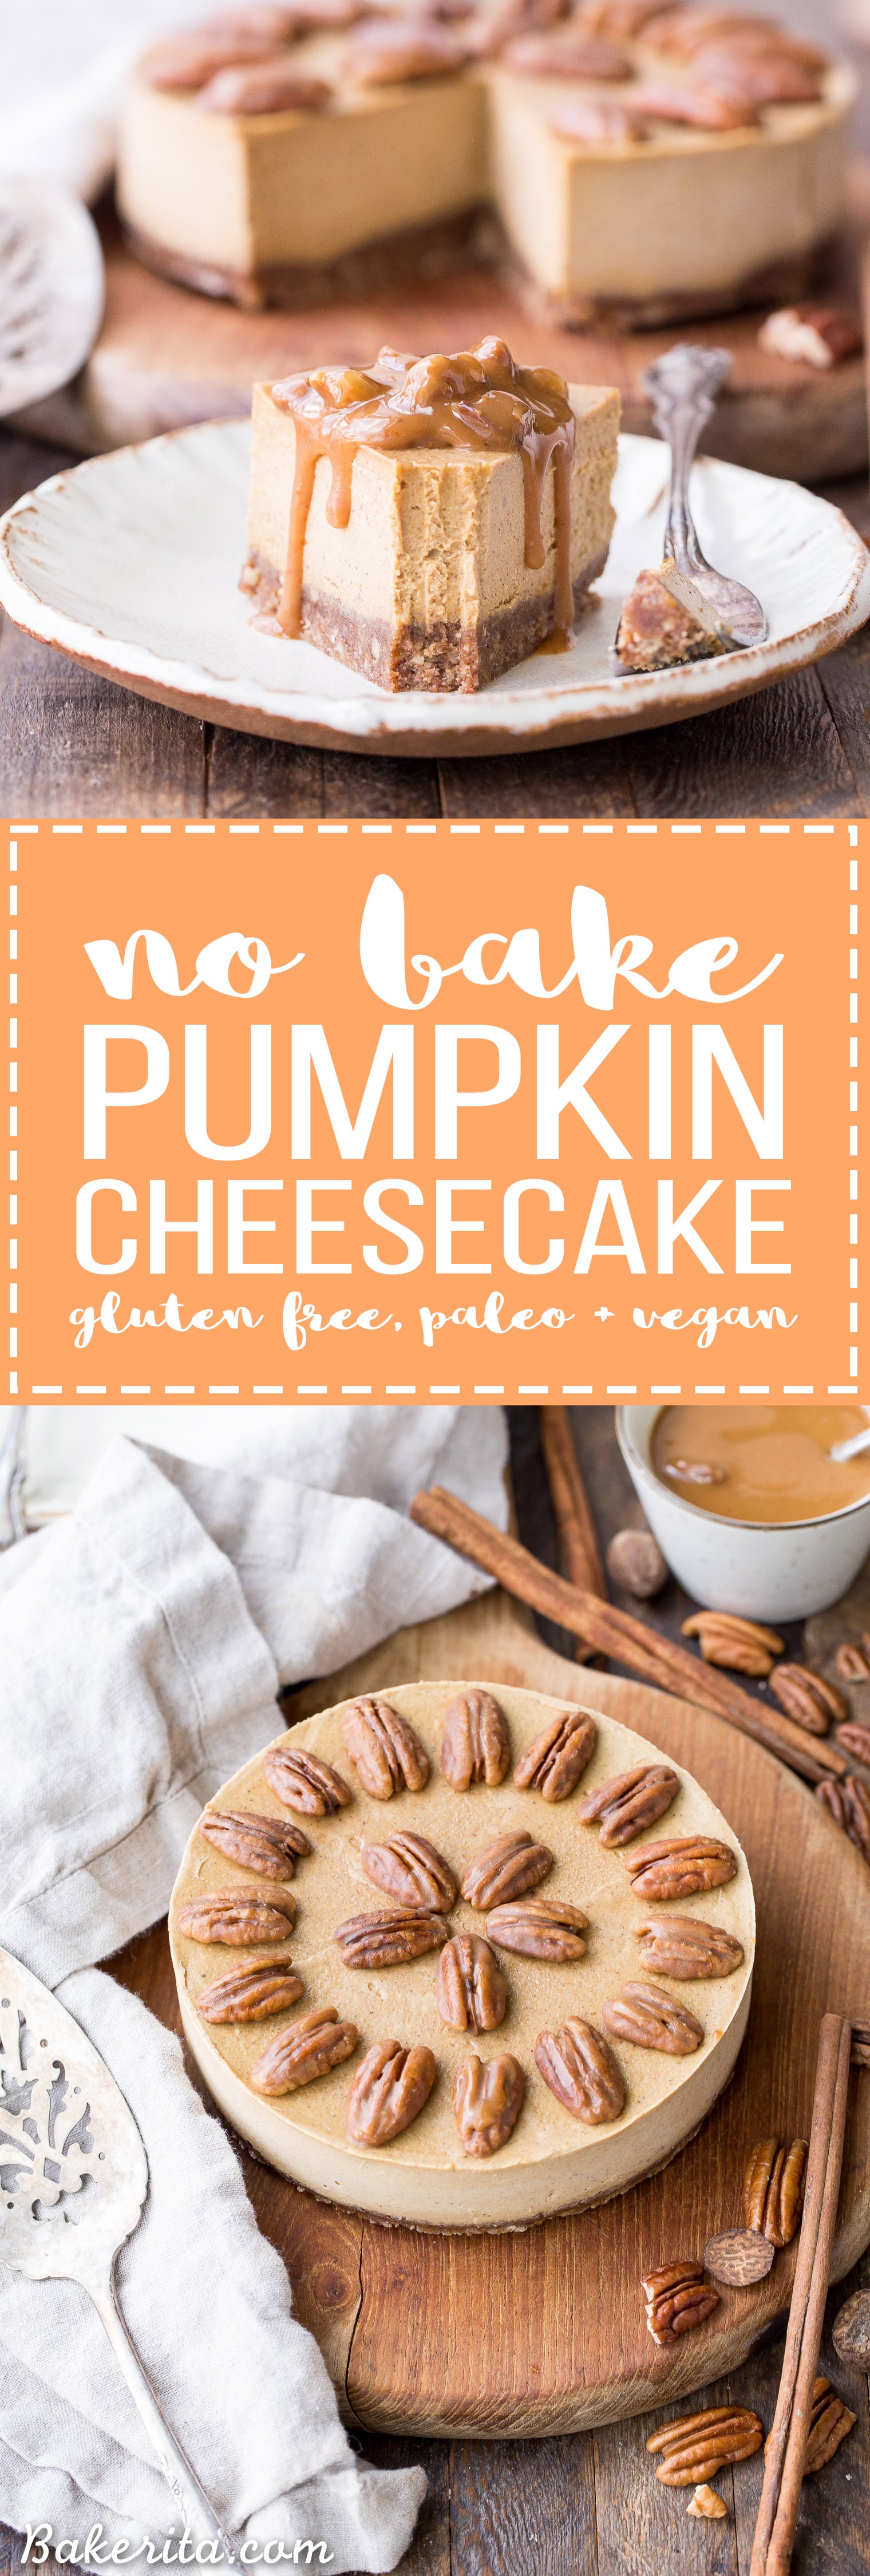 You'll love this super creamy No-Bake Vegan Pumpkin Cheesecake! It has a pecan crust and a spiced pumpkin cheesecake filling that's made with soaked cashews. This healthier pumpkin cheesecake is gluten-free, dairy-free, paleo + vegan, and absolutely perfect for the holidays.